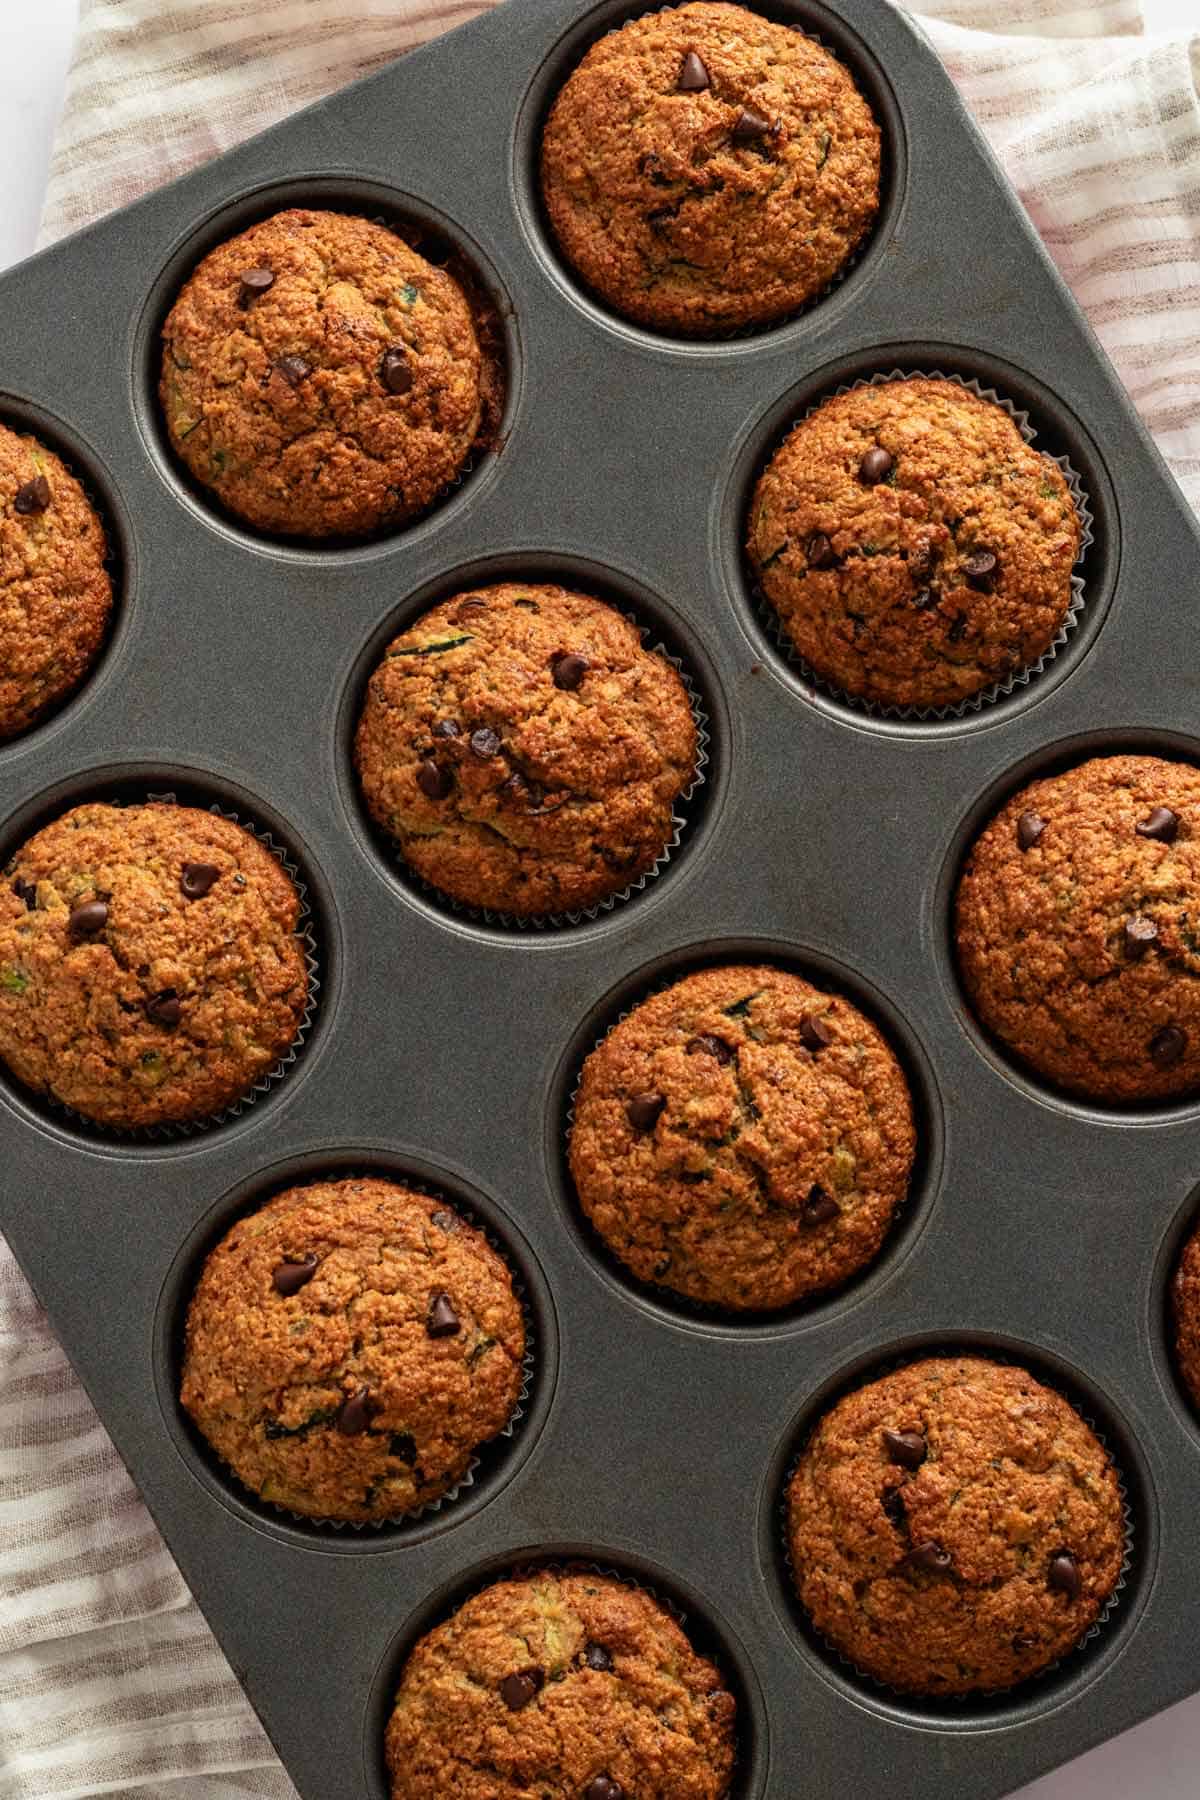 zucchini muffins in muffin pan right after baking.